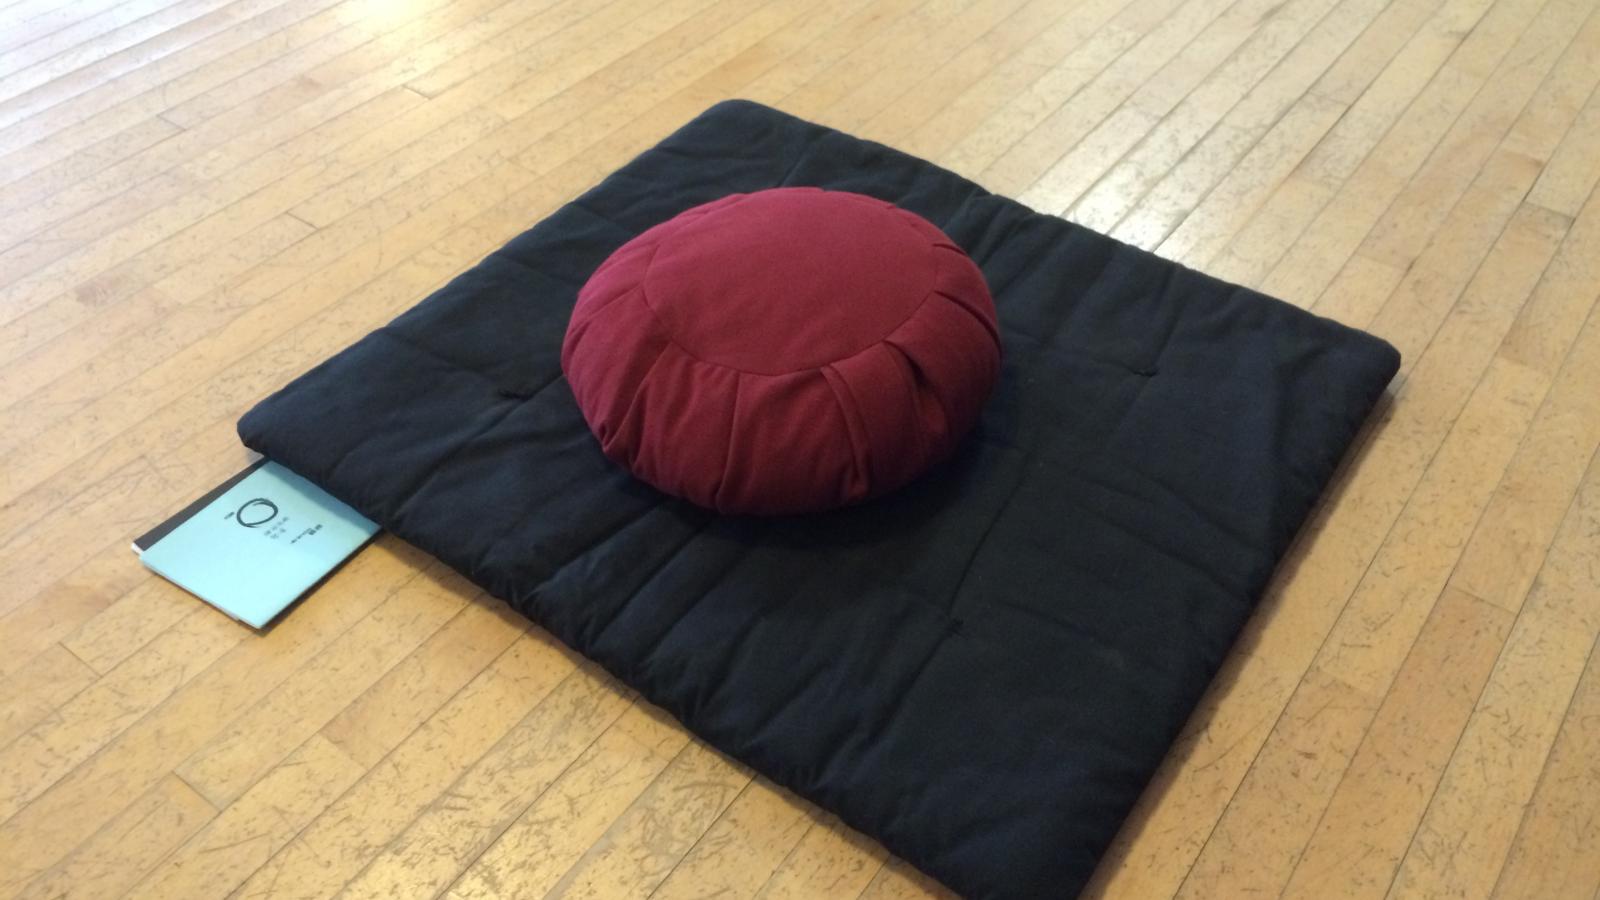 A typical meditation zabuton (mat) with a zafu (cushion), along with the sutra books